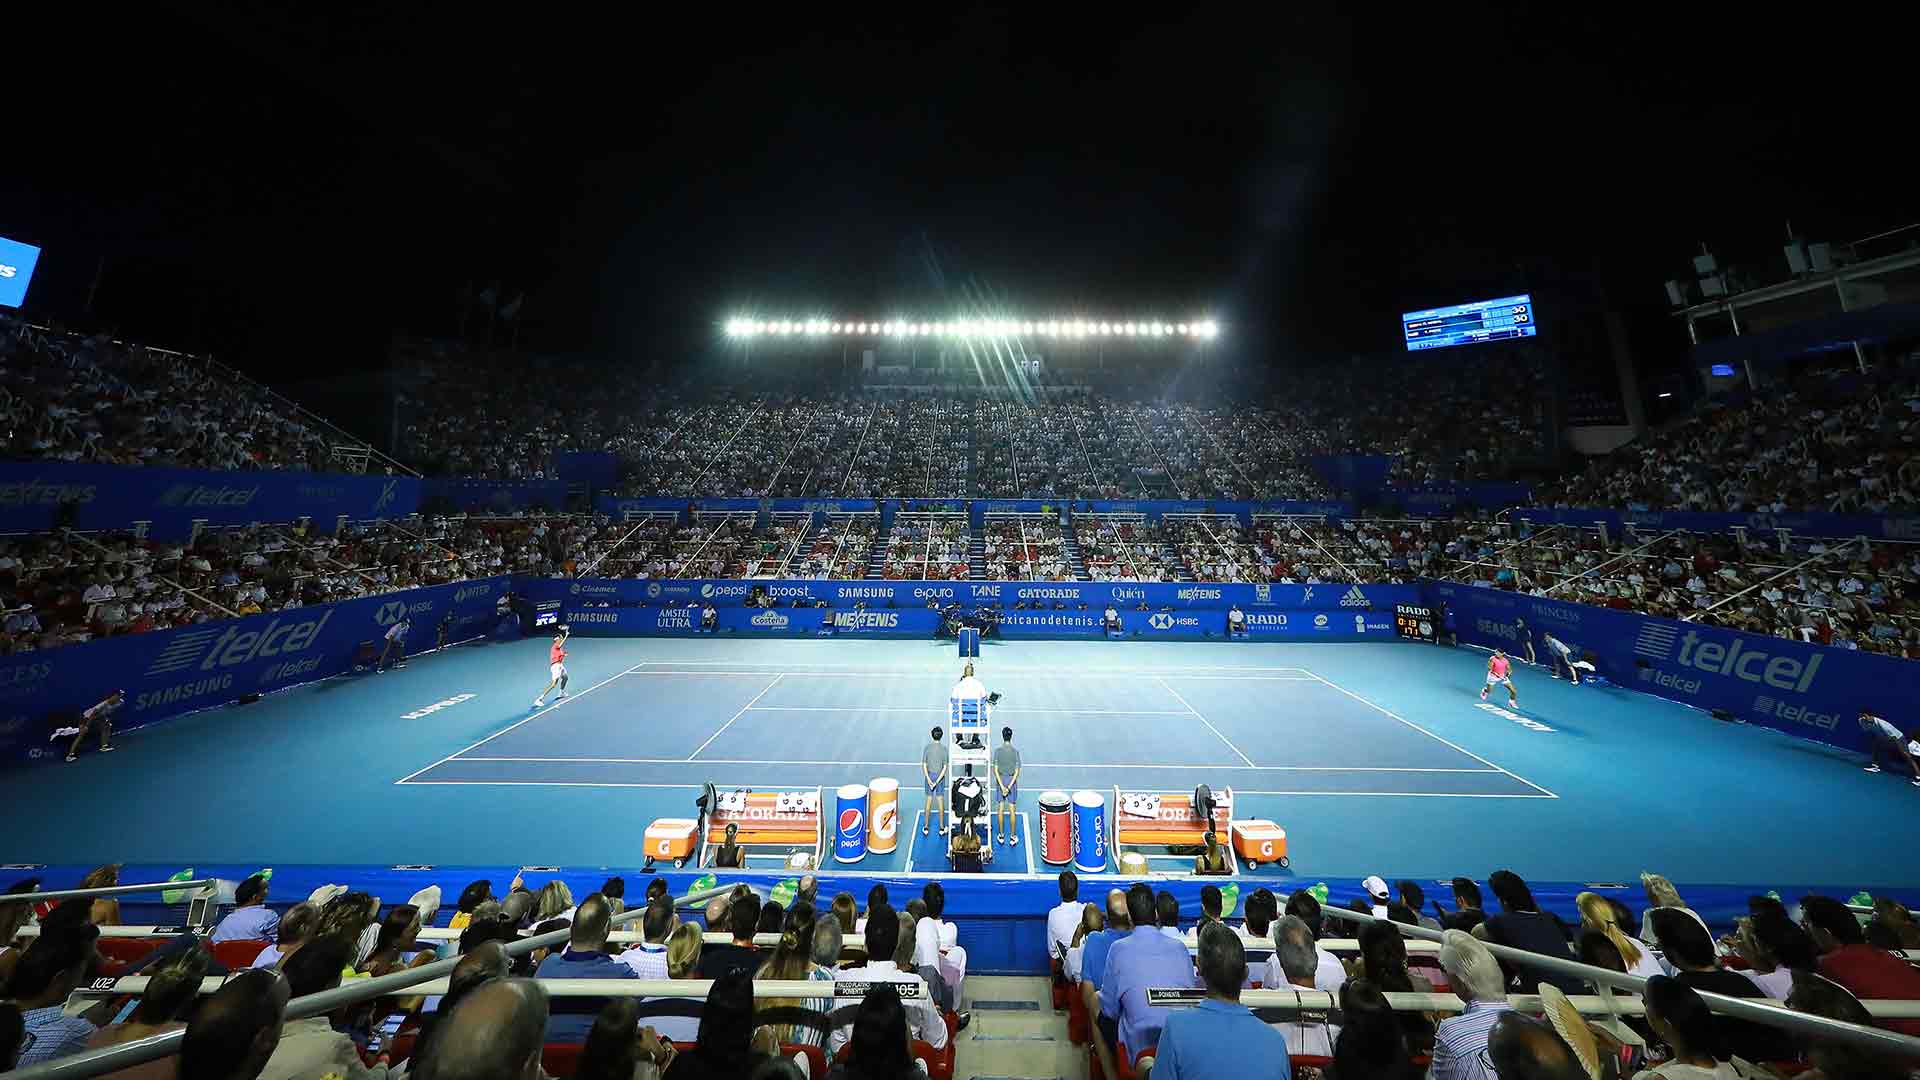 The Abierto Mexicano Telcel presentado por HSBC will be held from 27 February - 4 March in Acapulco.